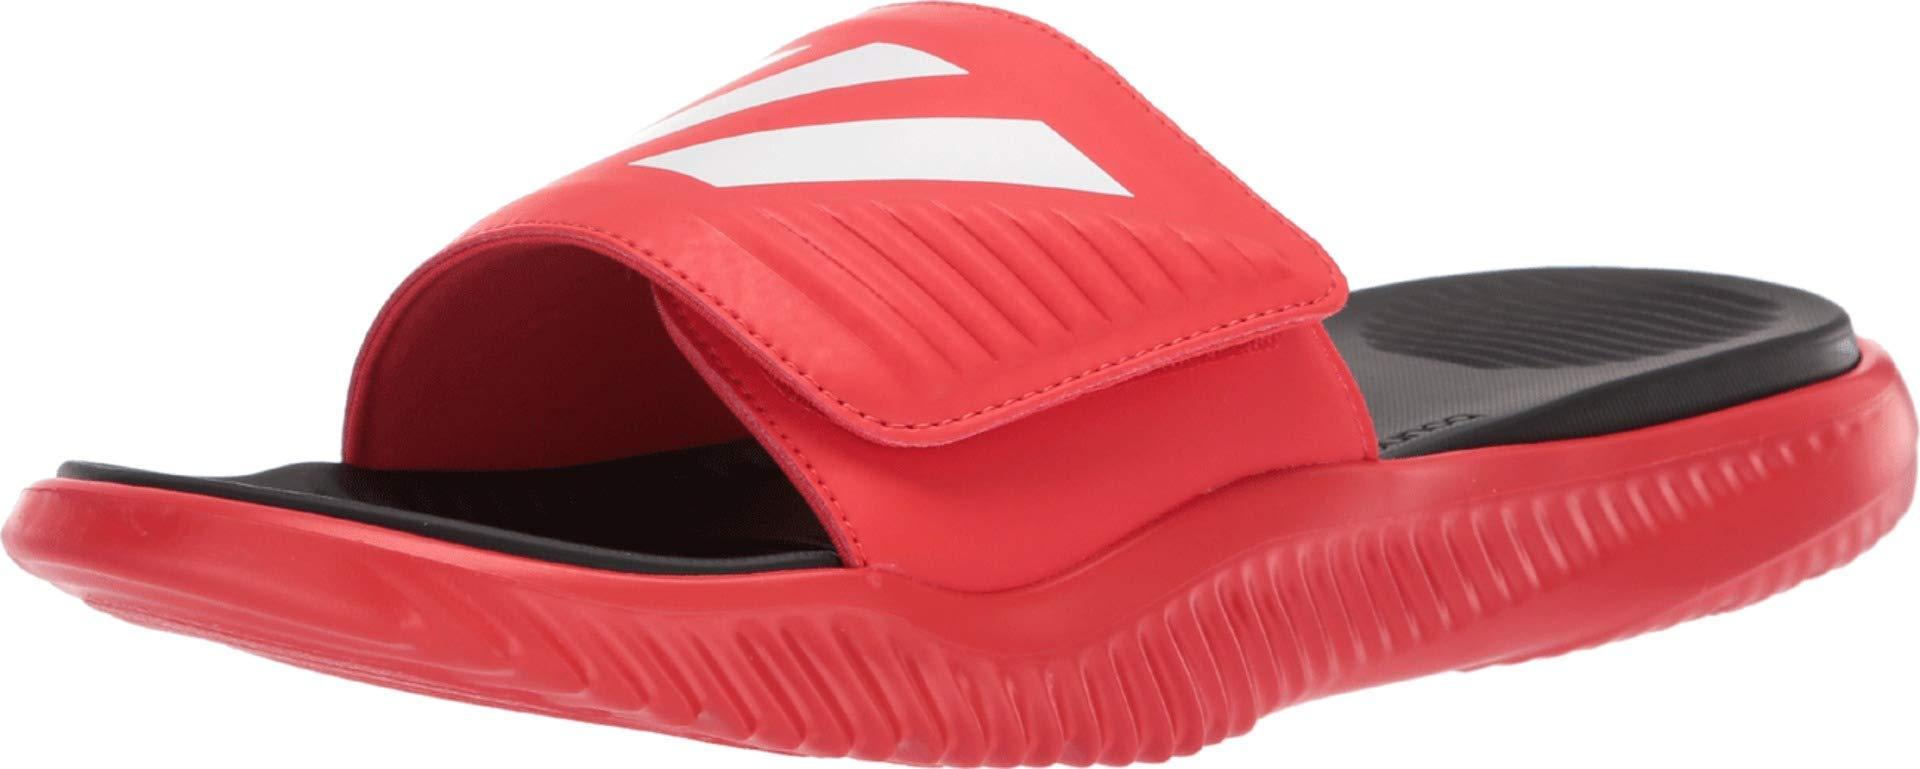 adidas Alphabounce Slide in Red/White (Red) for Men - Lyst